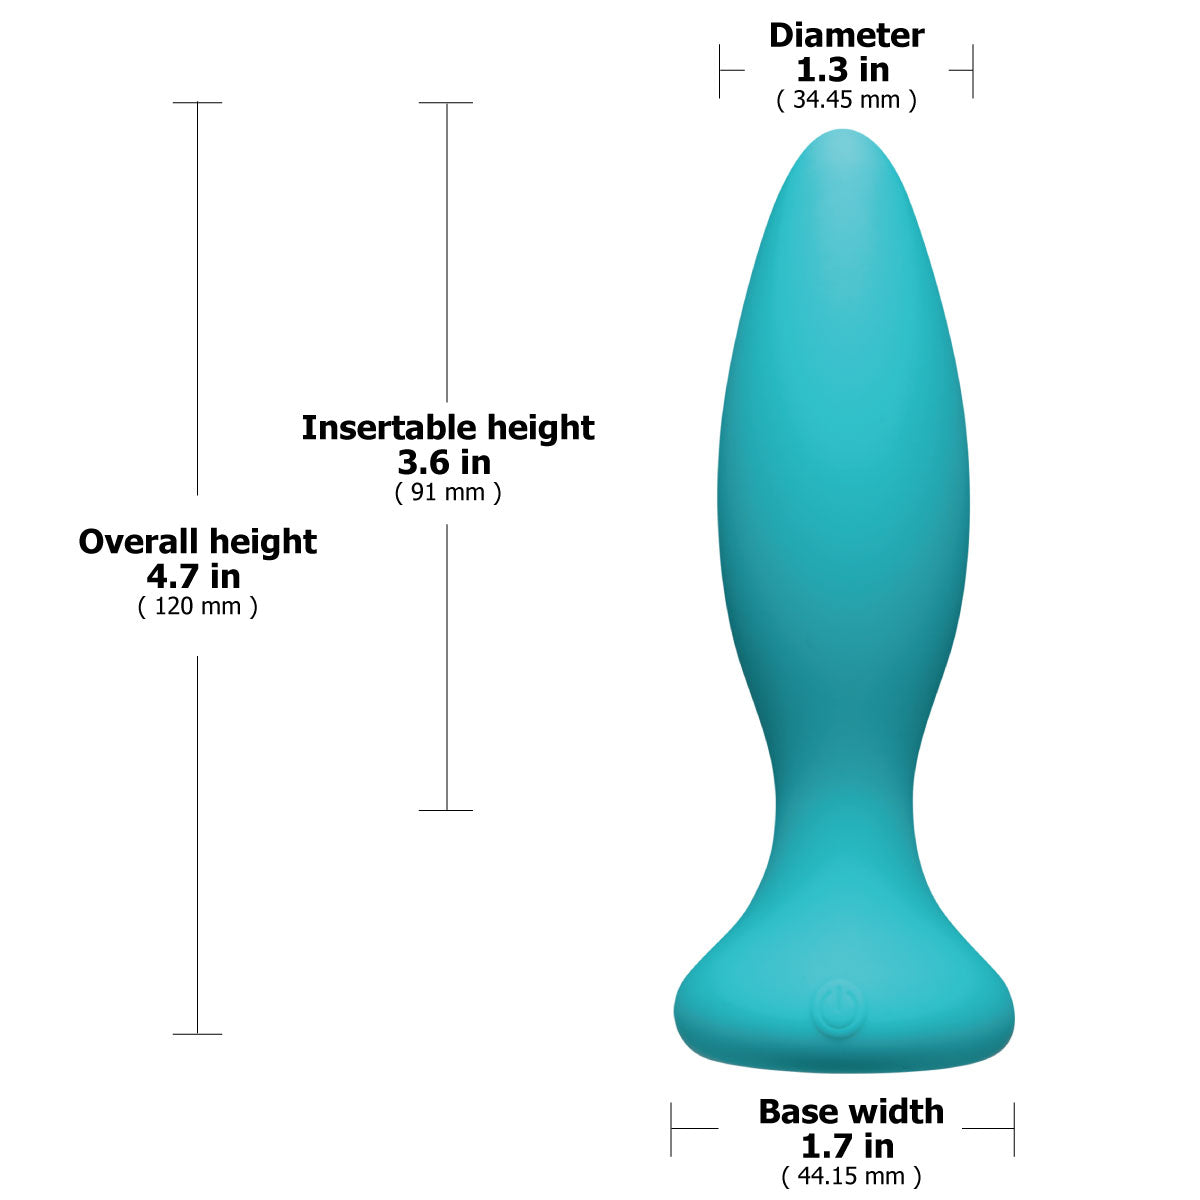 Doc Johnson A Play Beginner VIBE – Silicone Vibrating Butt Plug with Remote – Teal